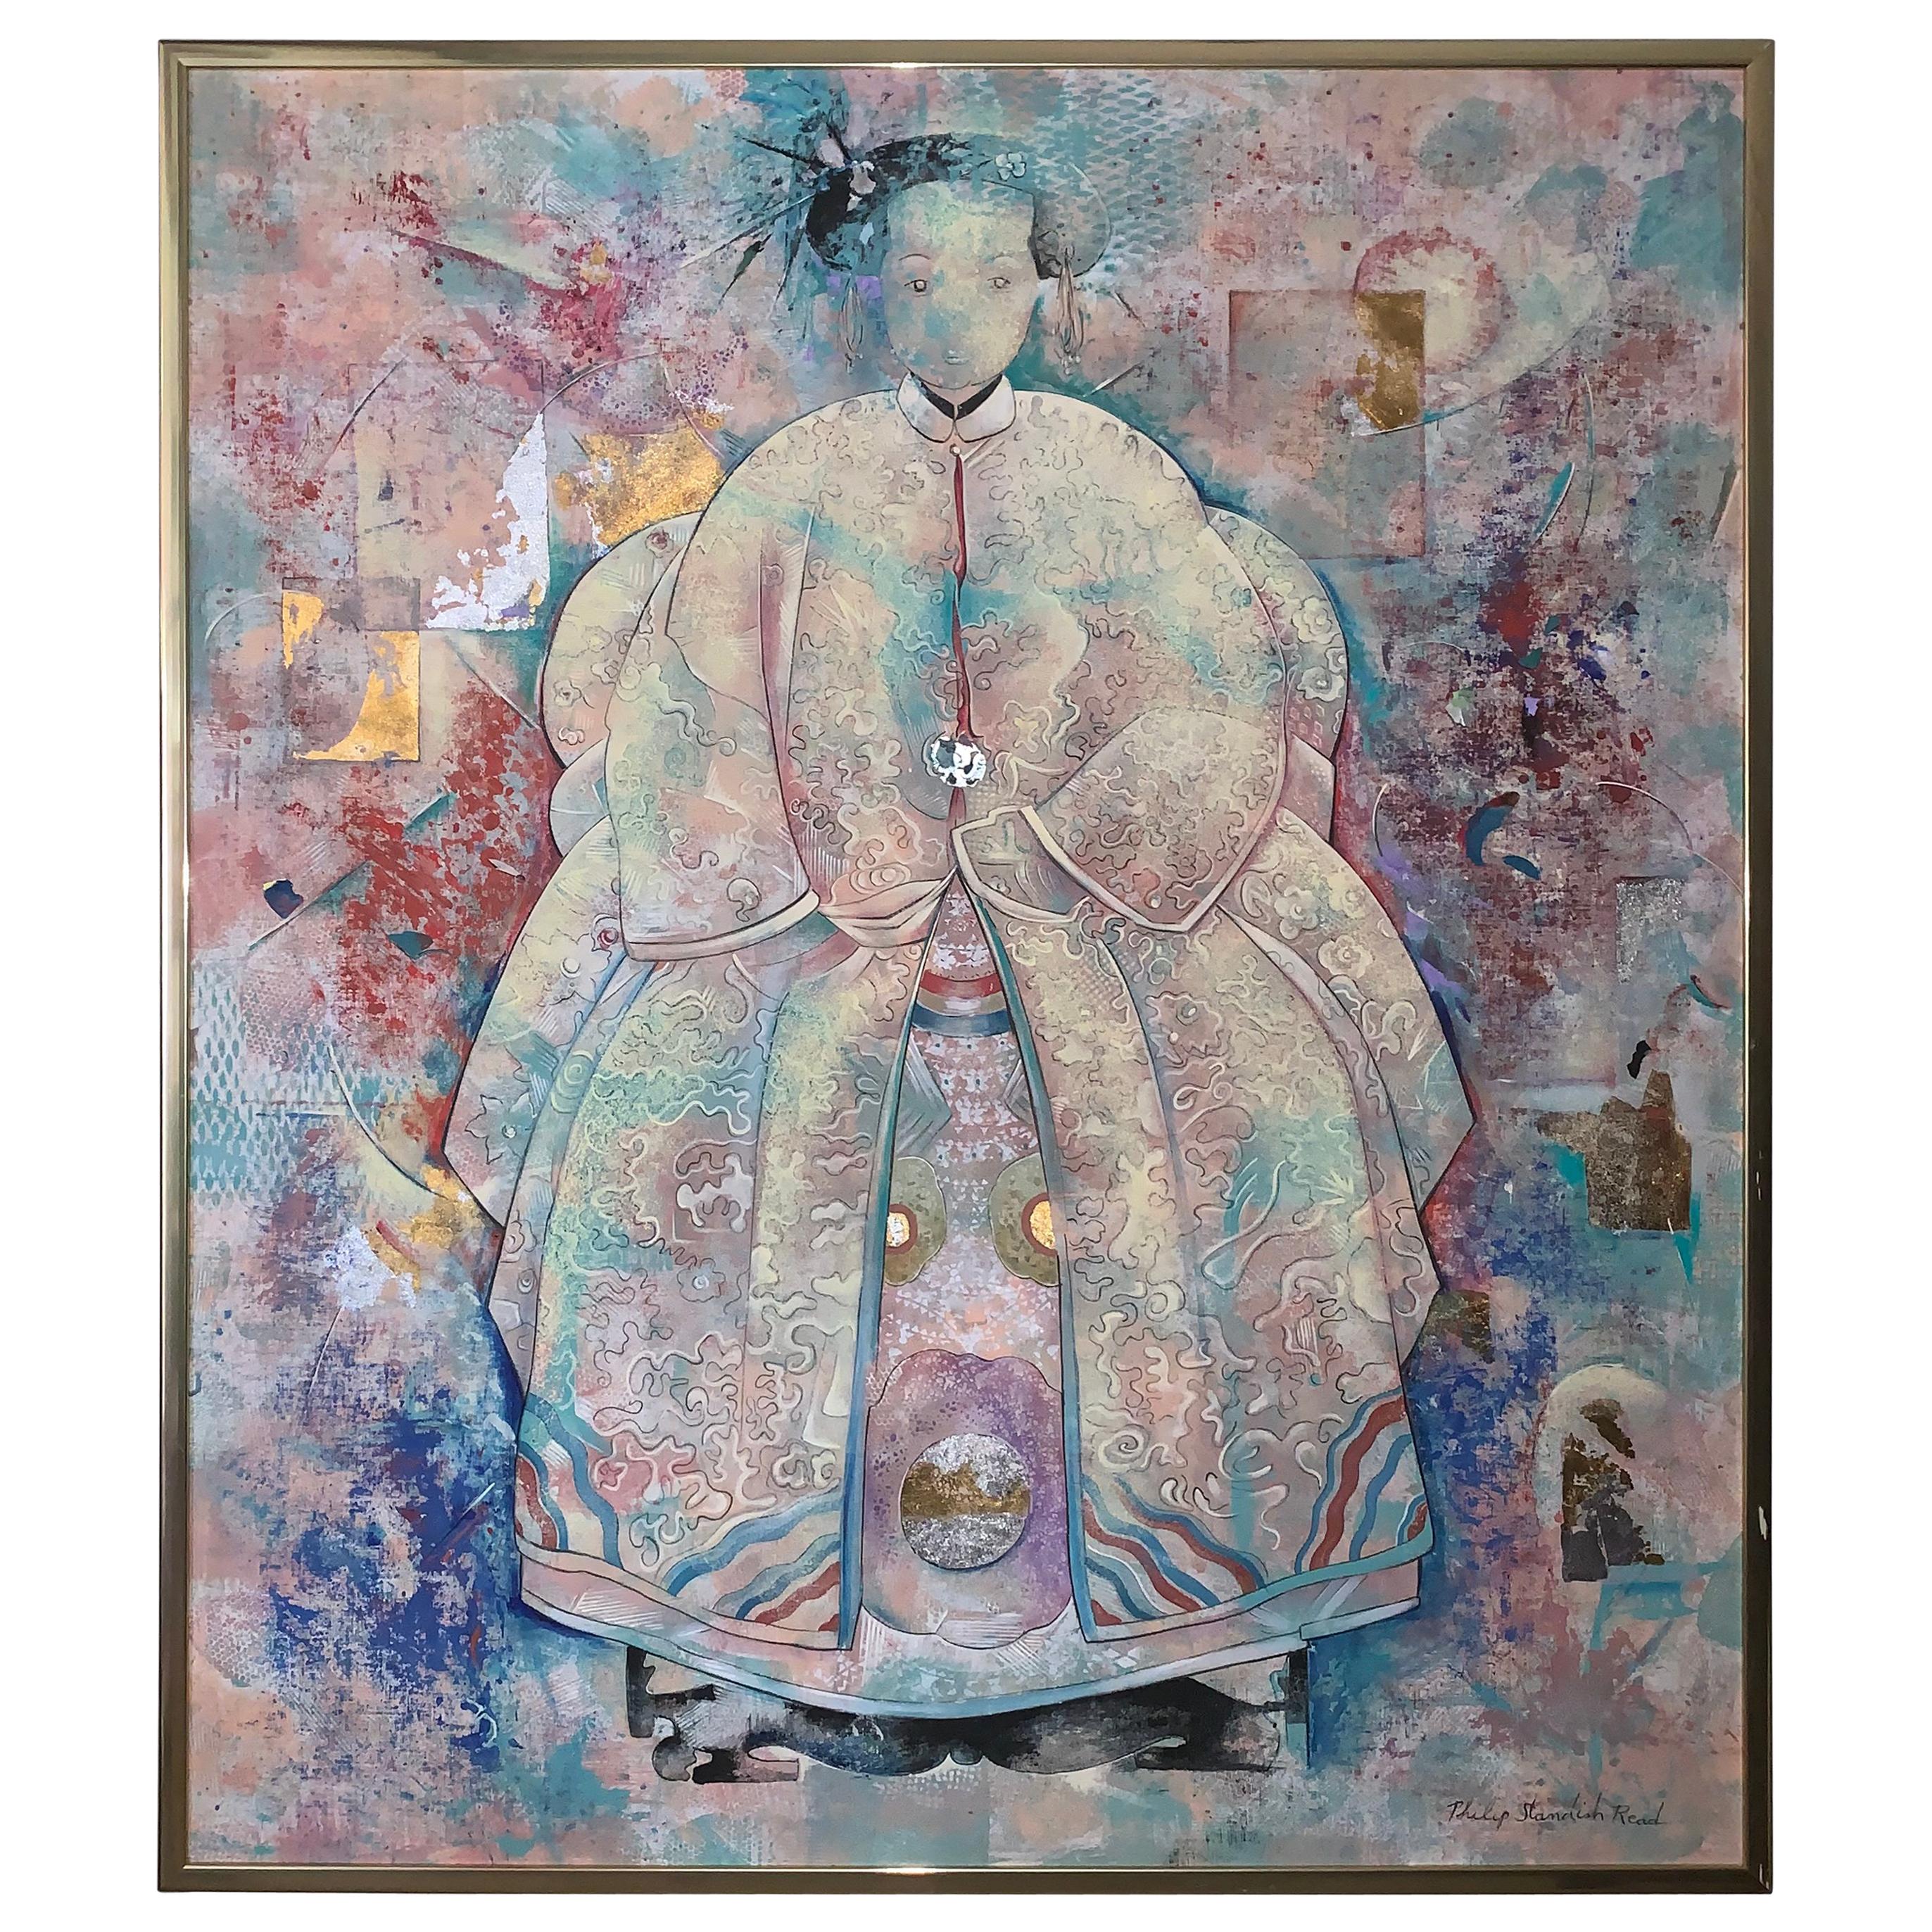 Extremely Large Beautiful Mixed-Media Painting of Asian Woman